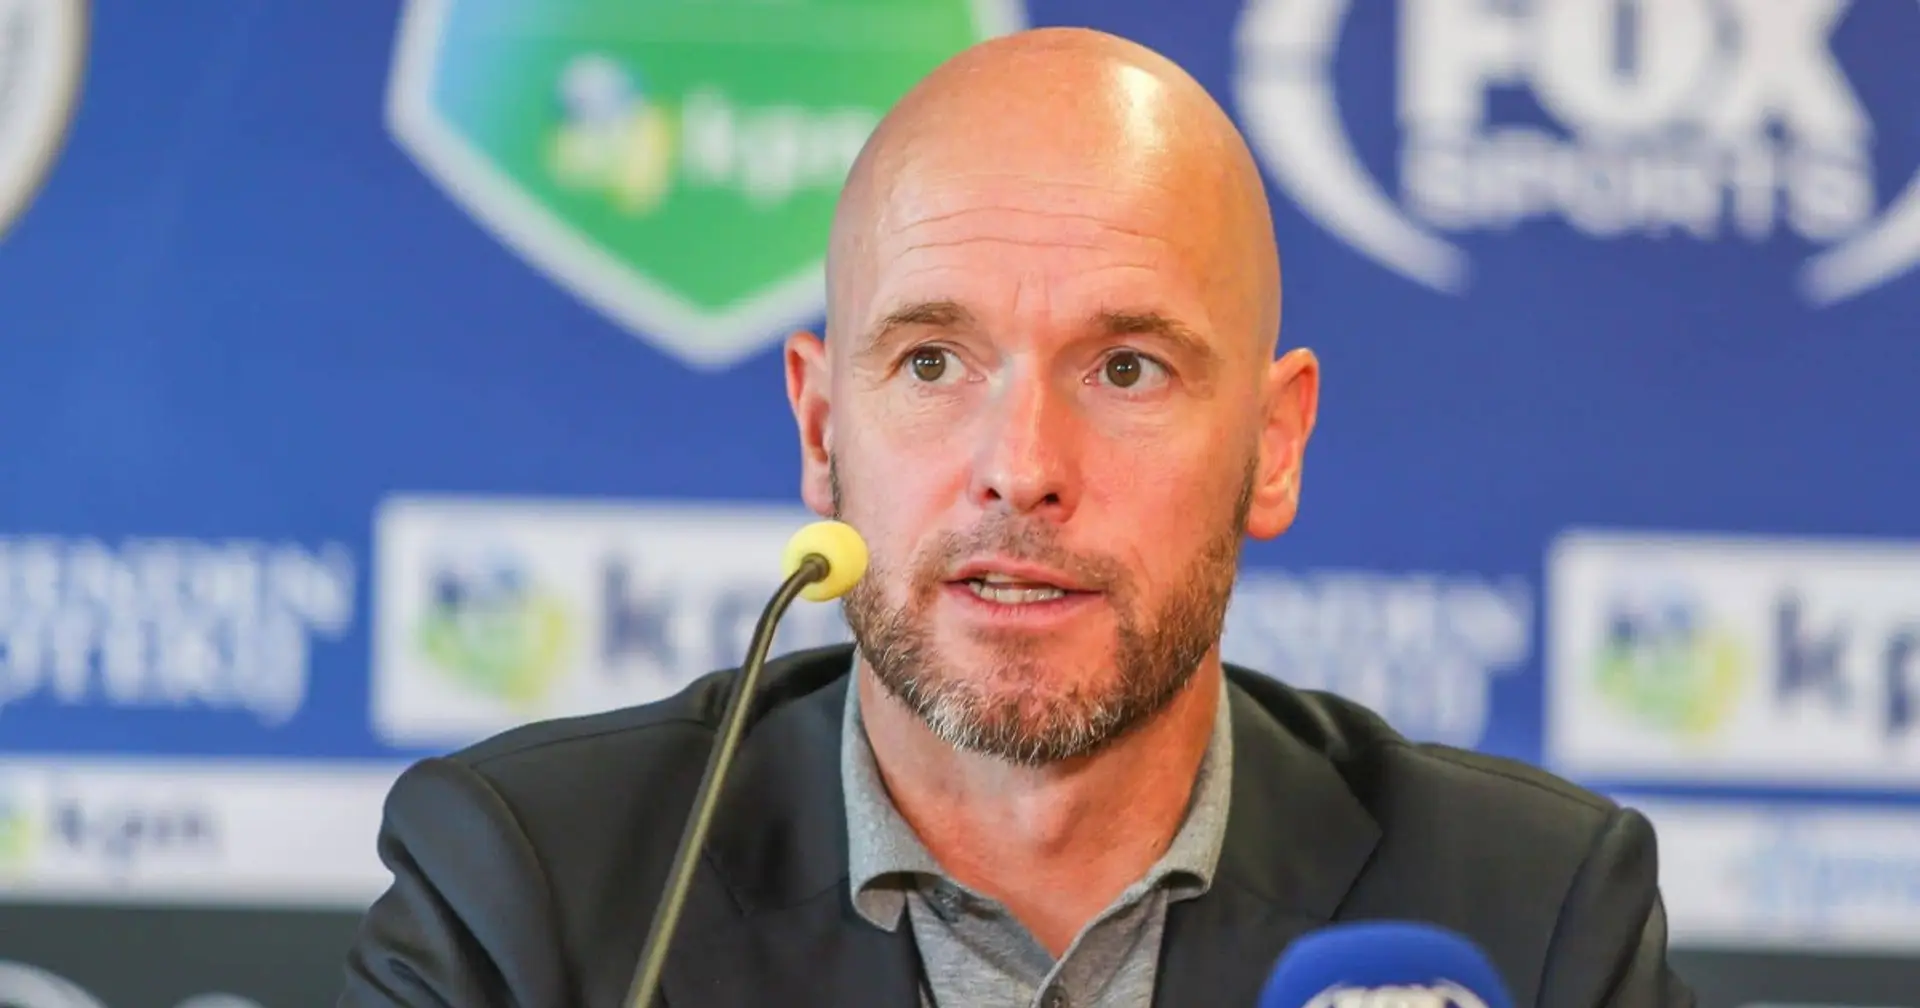 Erik ten Hag 'close' to deciding on Man United offer - The Athletic (reliability: 5 stars)